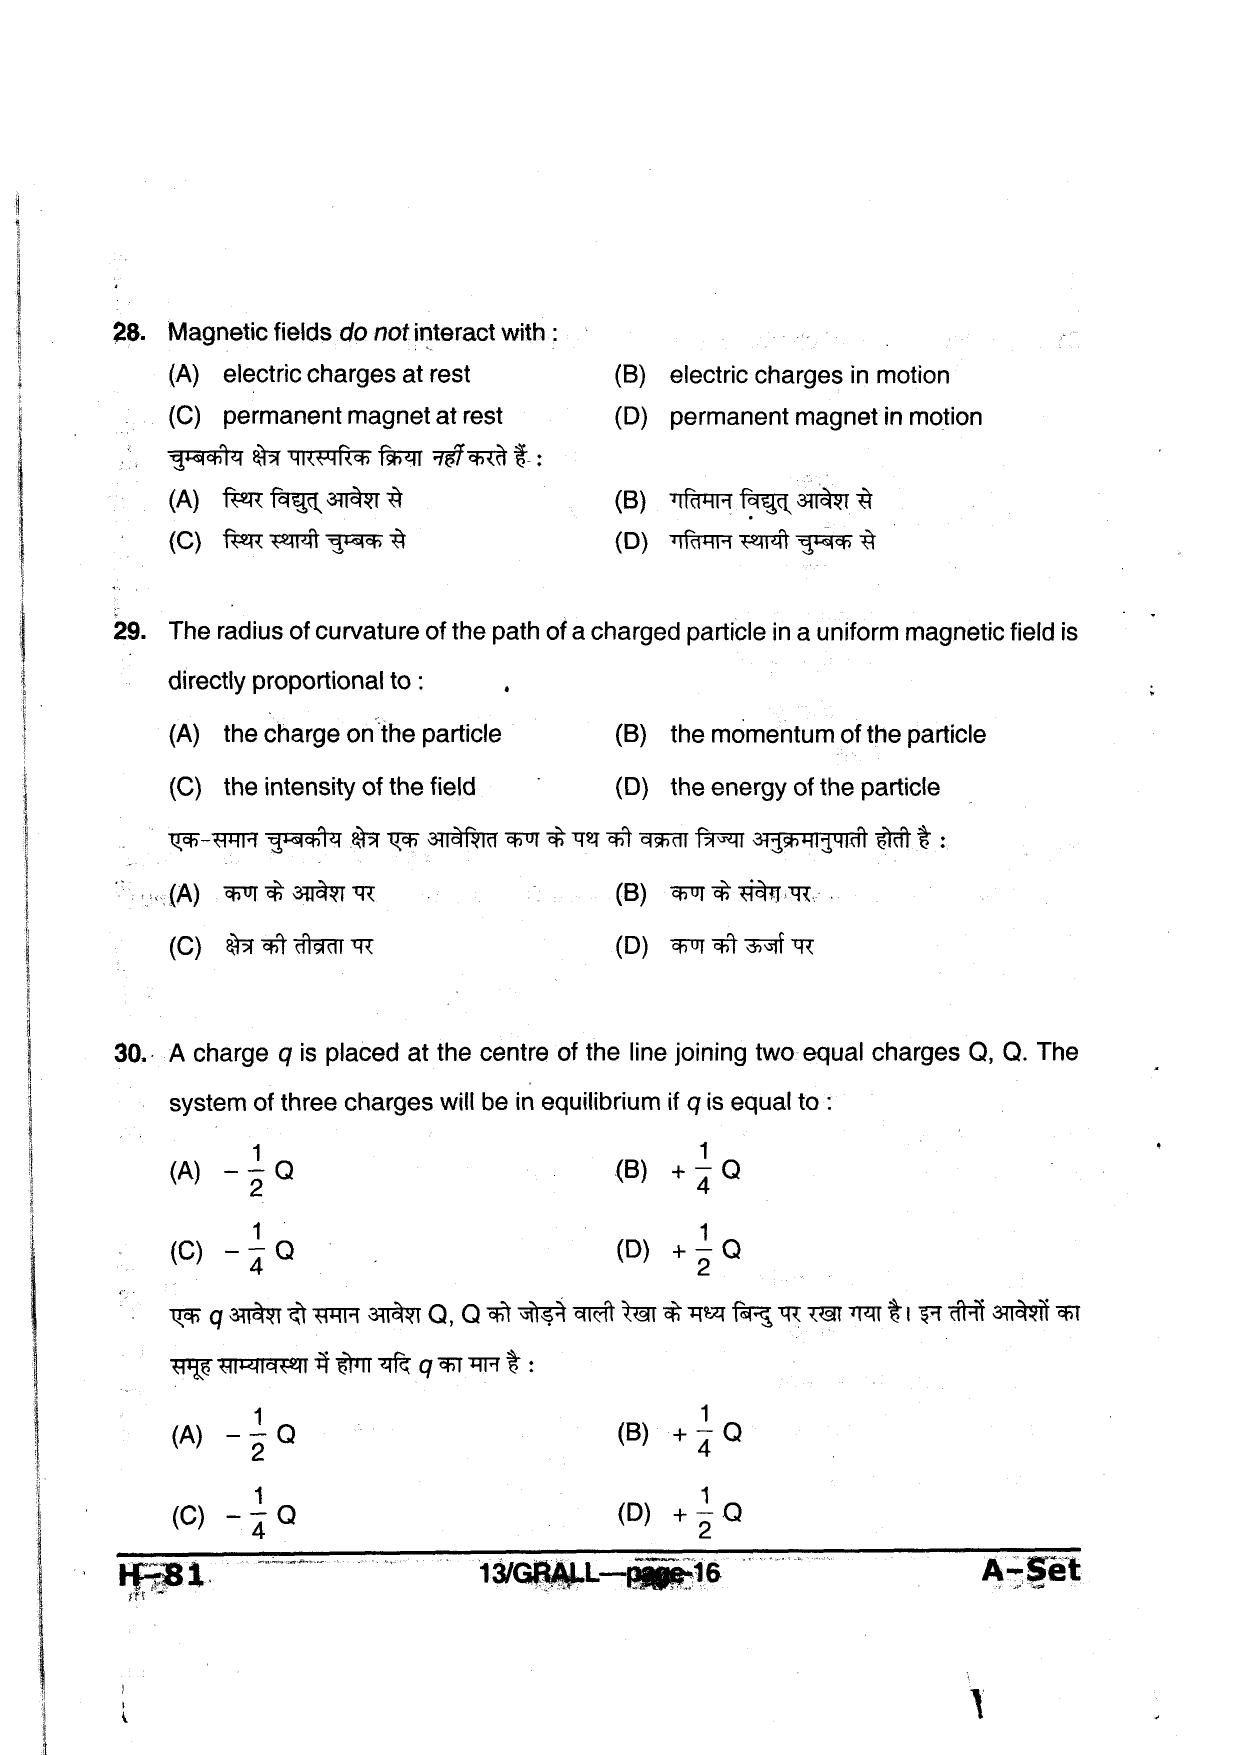 MP PAT 2013 Question Paper - Paper I - Page 16